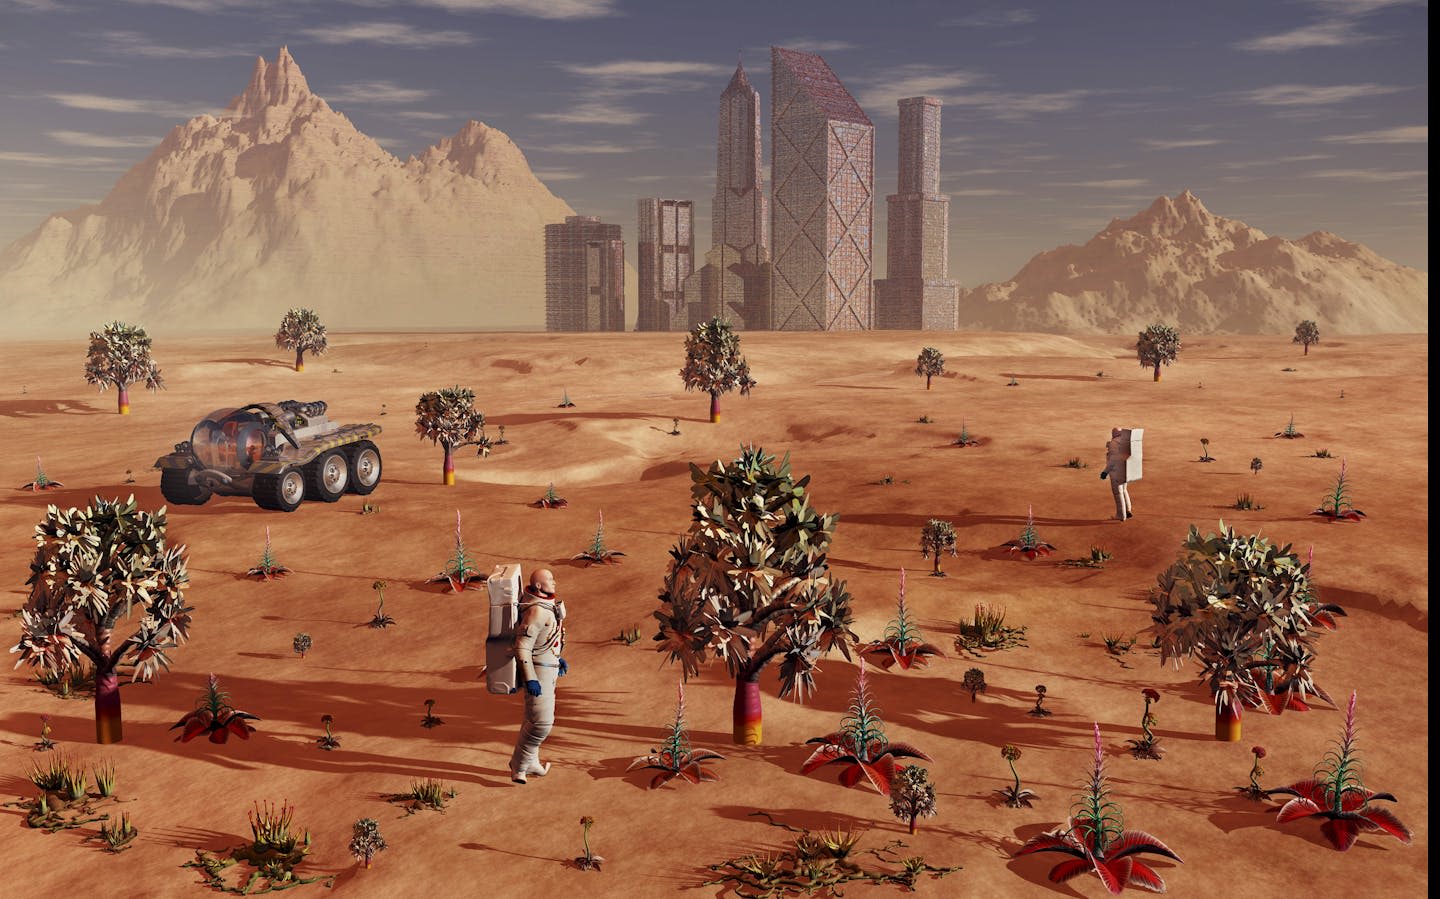 Could people turn Mars into another Earth? Here’s what it would take to transform its barren landscape into a life-friendly world